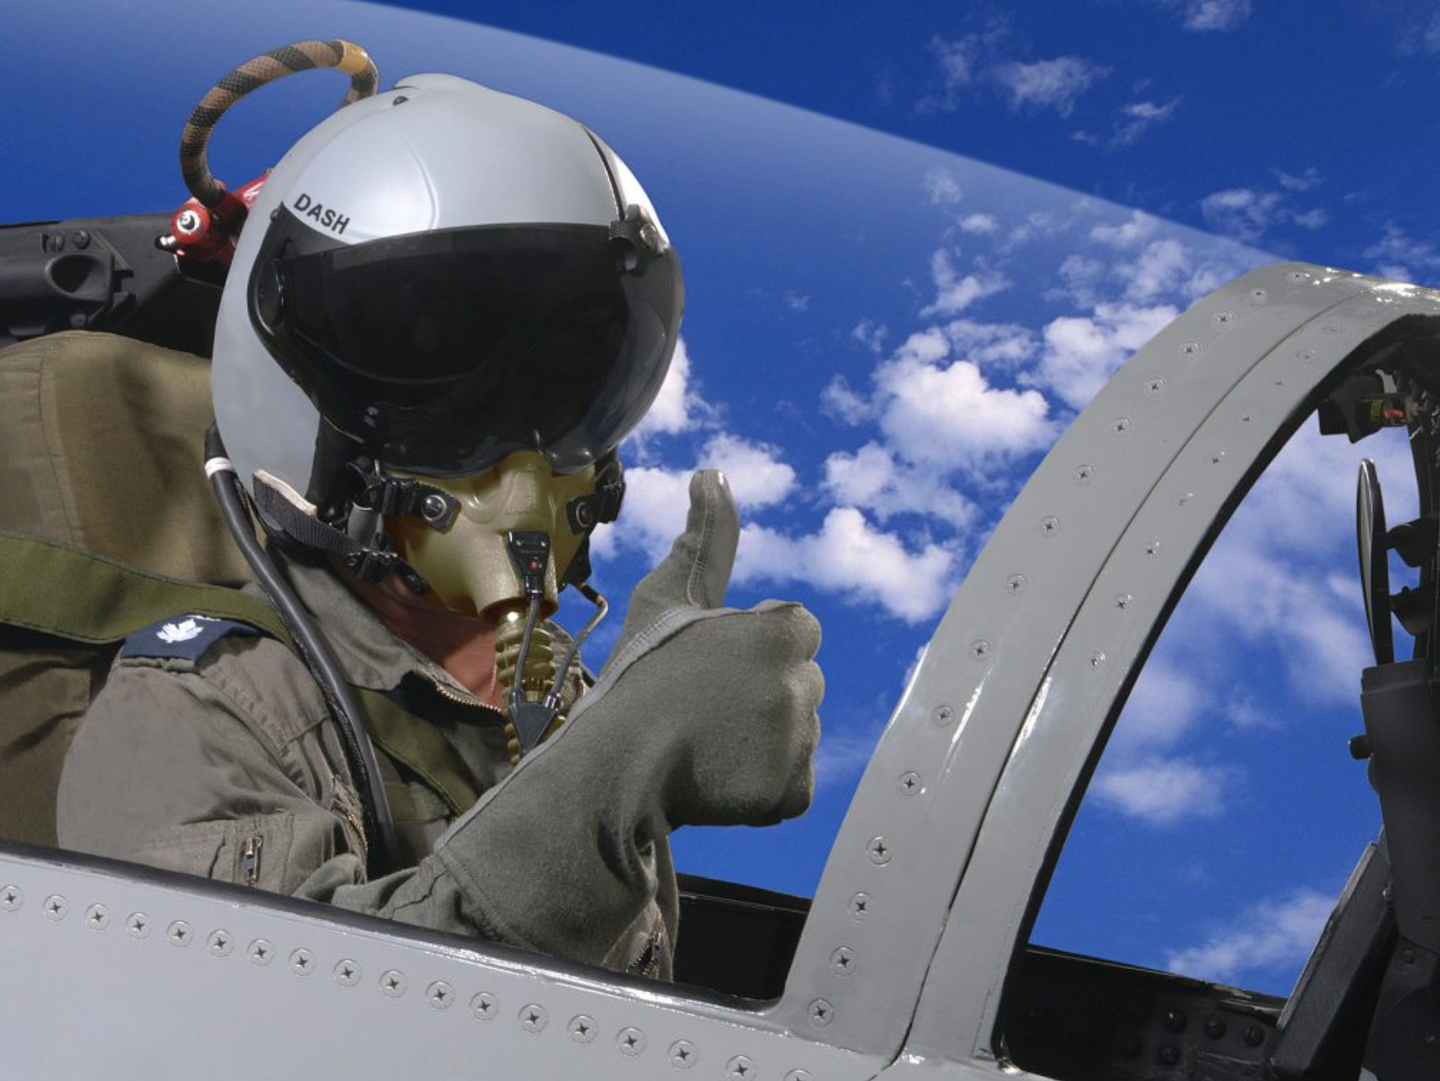 A publicity image of Elbit Systems’ Display and Sight Helmet (DASH) that enables pilots to aim their weapons simply by looking at the target.&nbsp;<em>Elbit Systems</em>